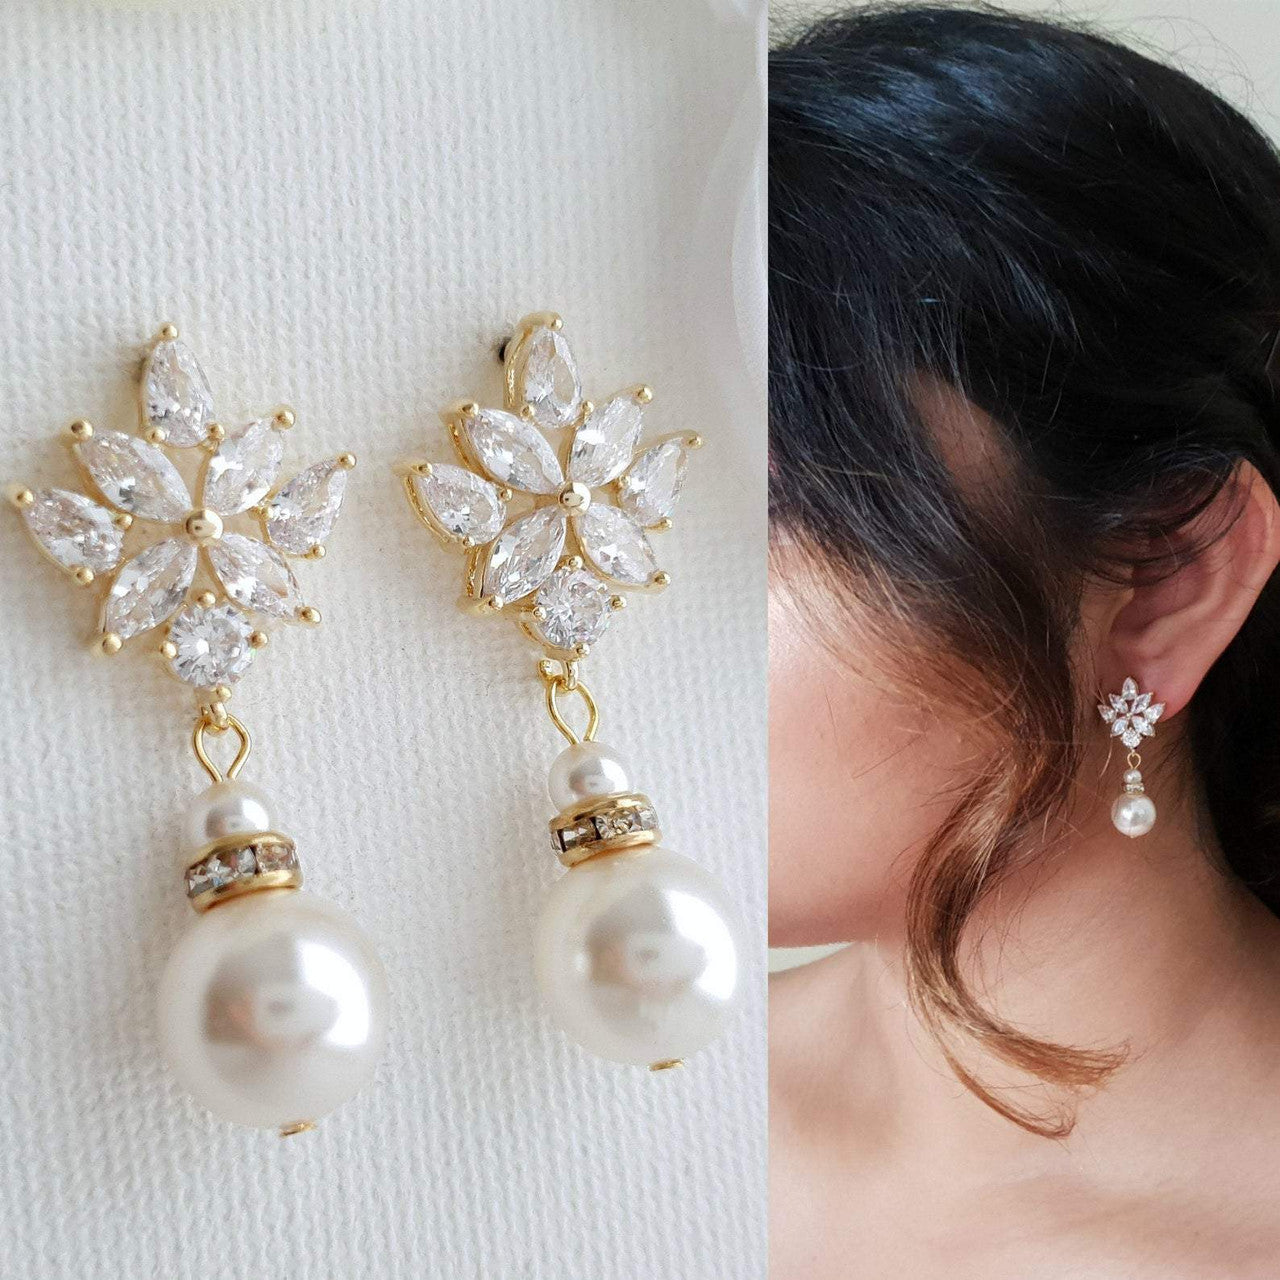 Bridal Earrings with Round Pearl Drops in Silver- Rosa